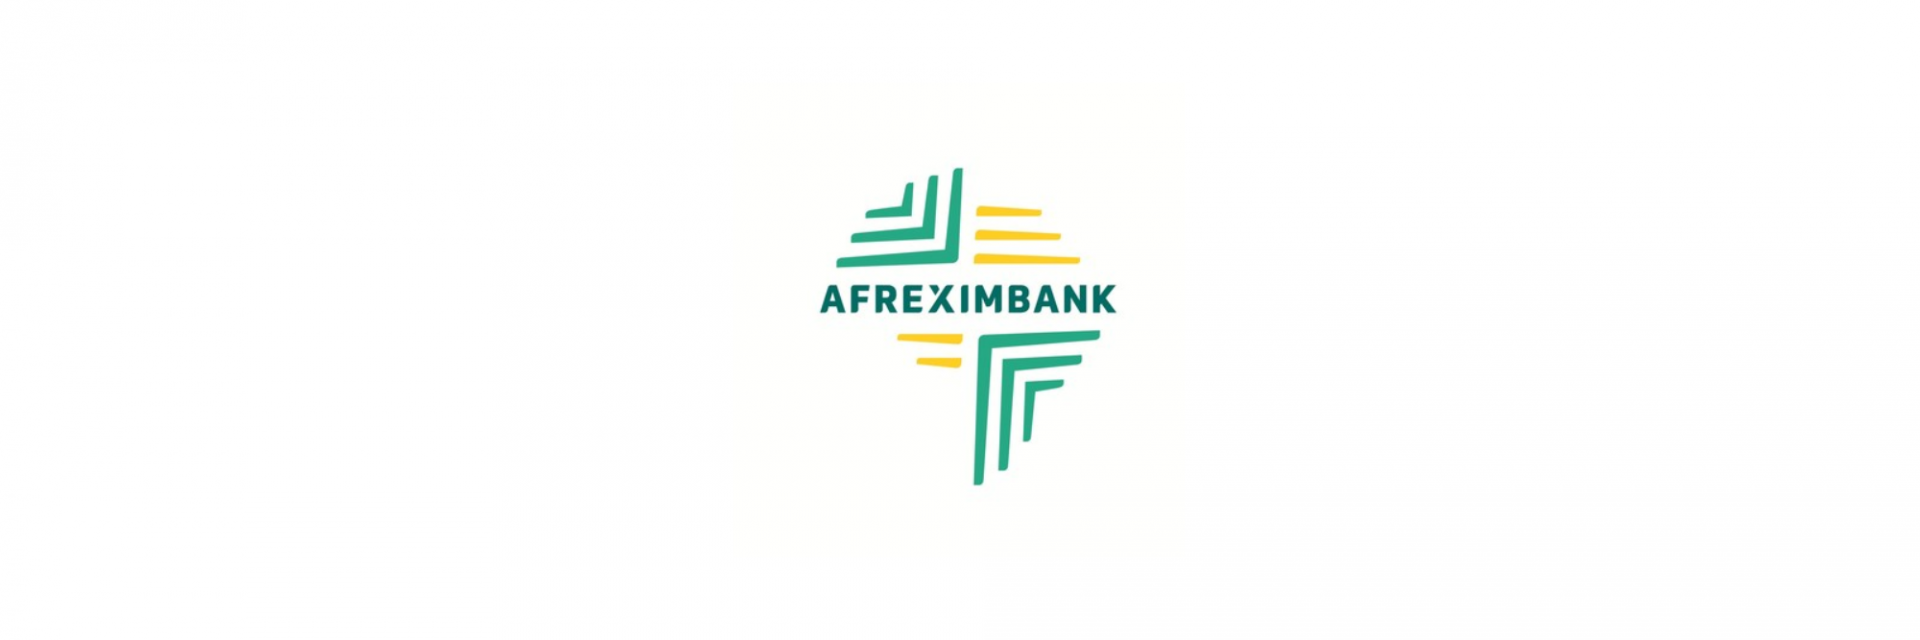 Examining the Afreximbank US$25 mil startup fund: Not nearly enough a share of US$650 mil available